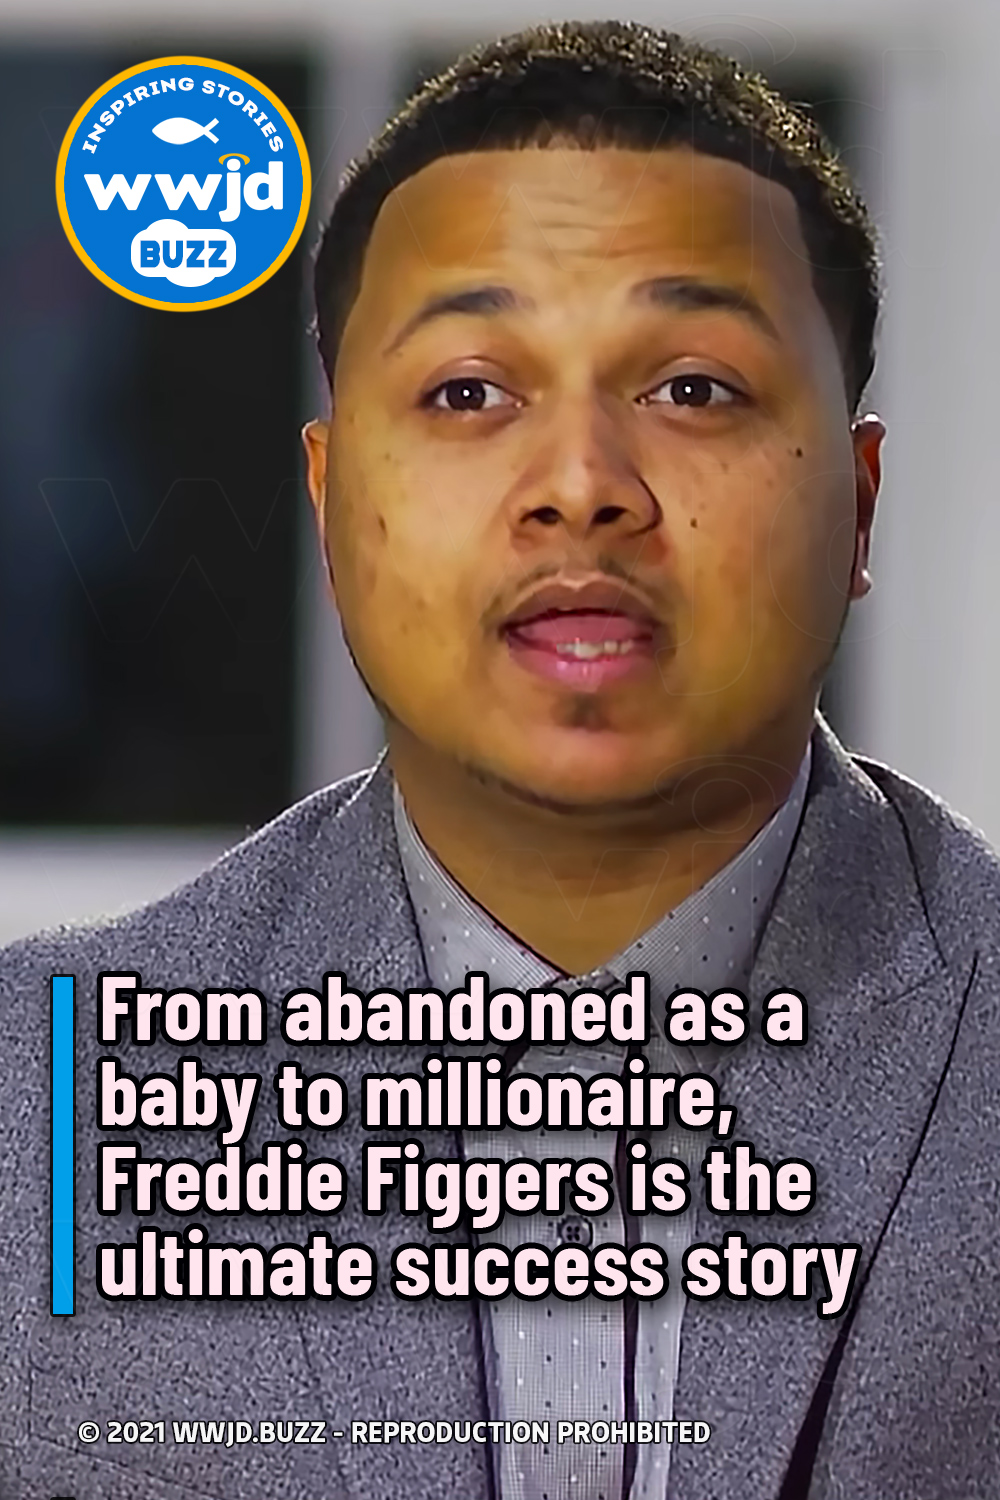 From abandoned as a baby to millionaire, Freddie Figgers is the ultimate success story